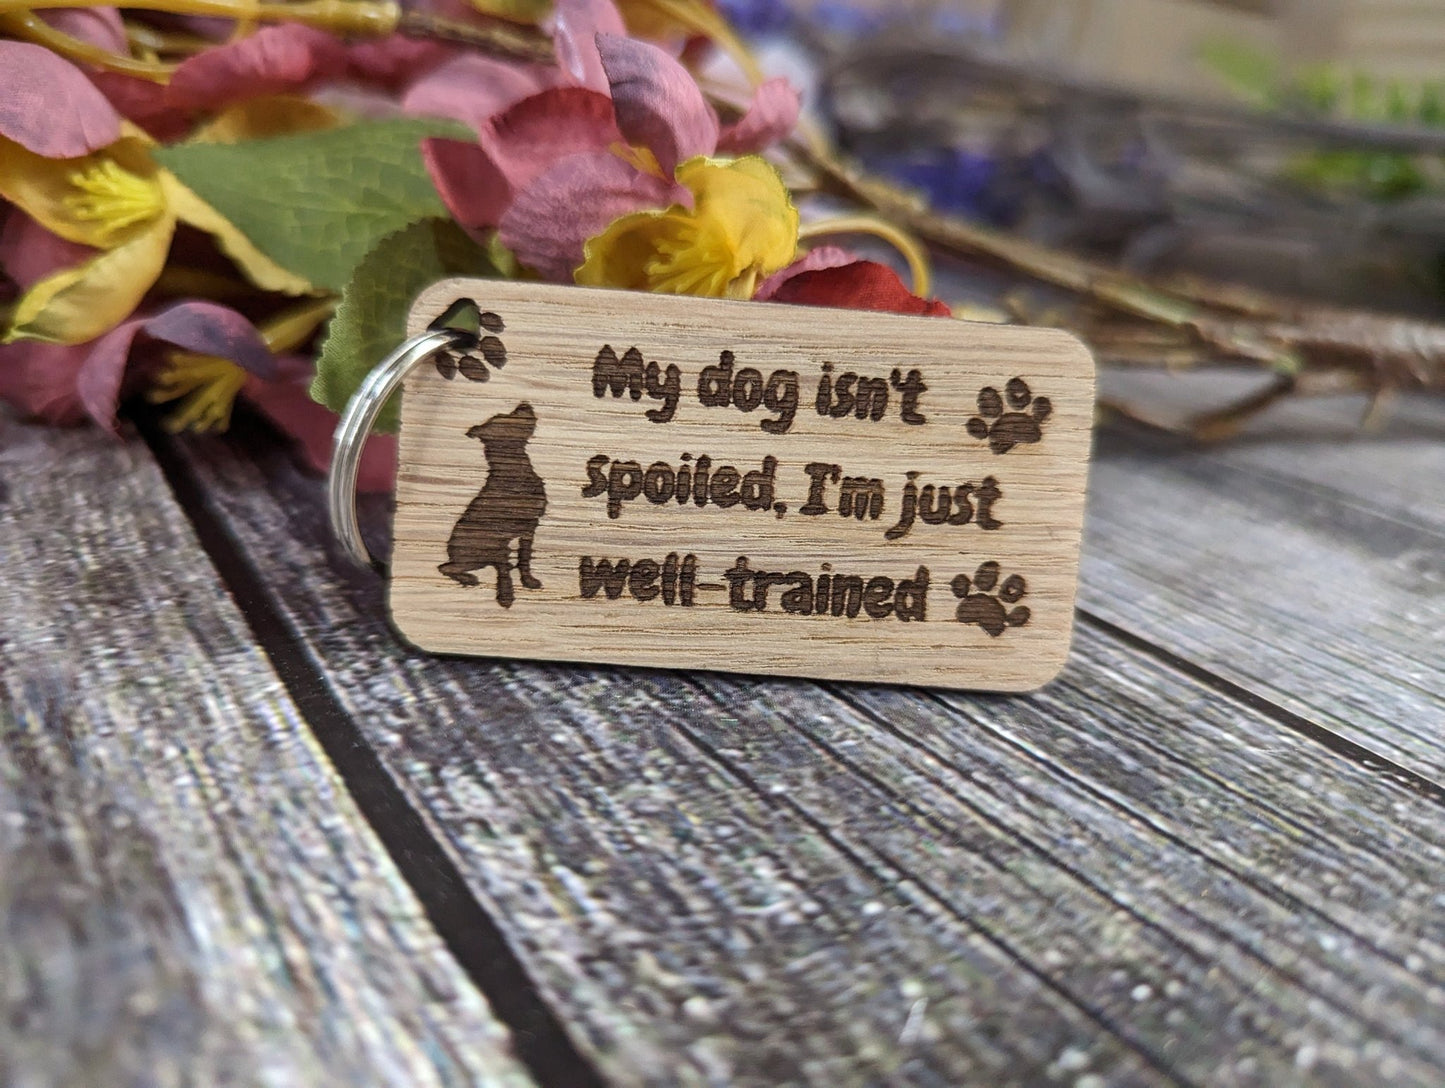 Handcrafted Oak Veneer Keyring 'My Dog Isn't Spoiled, I'm Just Well Trained' - Eco-Friendly Dog Lover Accessory, Perfect Gift for Pet Owners - CherryGroveCraft